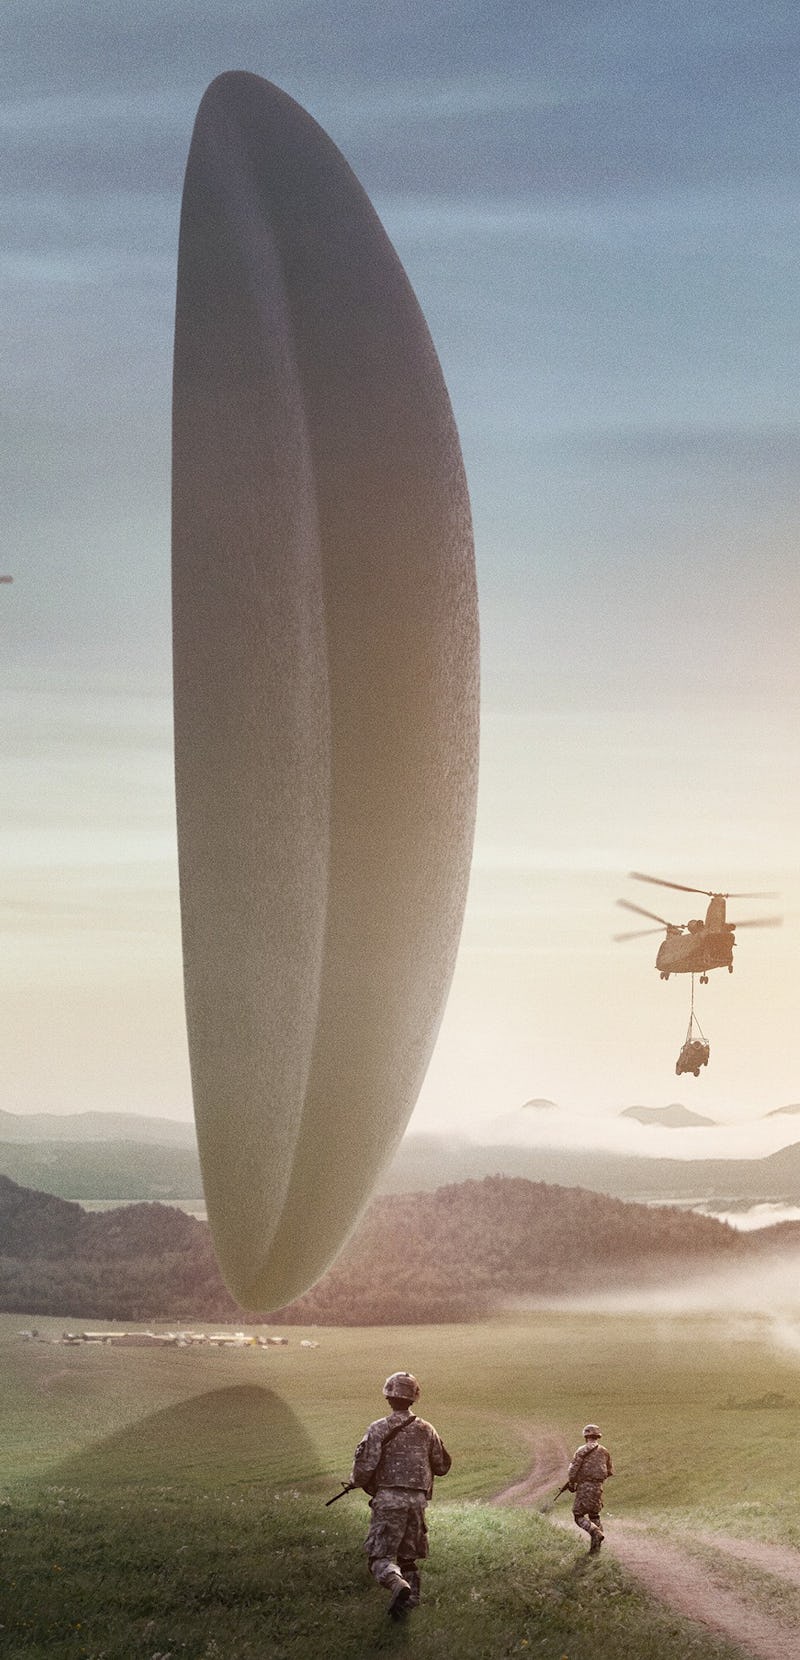 arrival movie poster